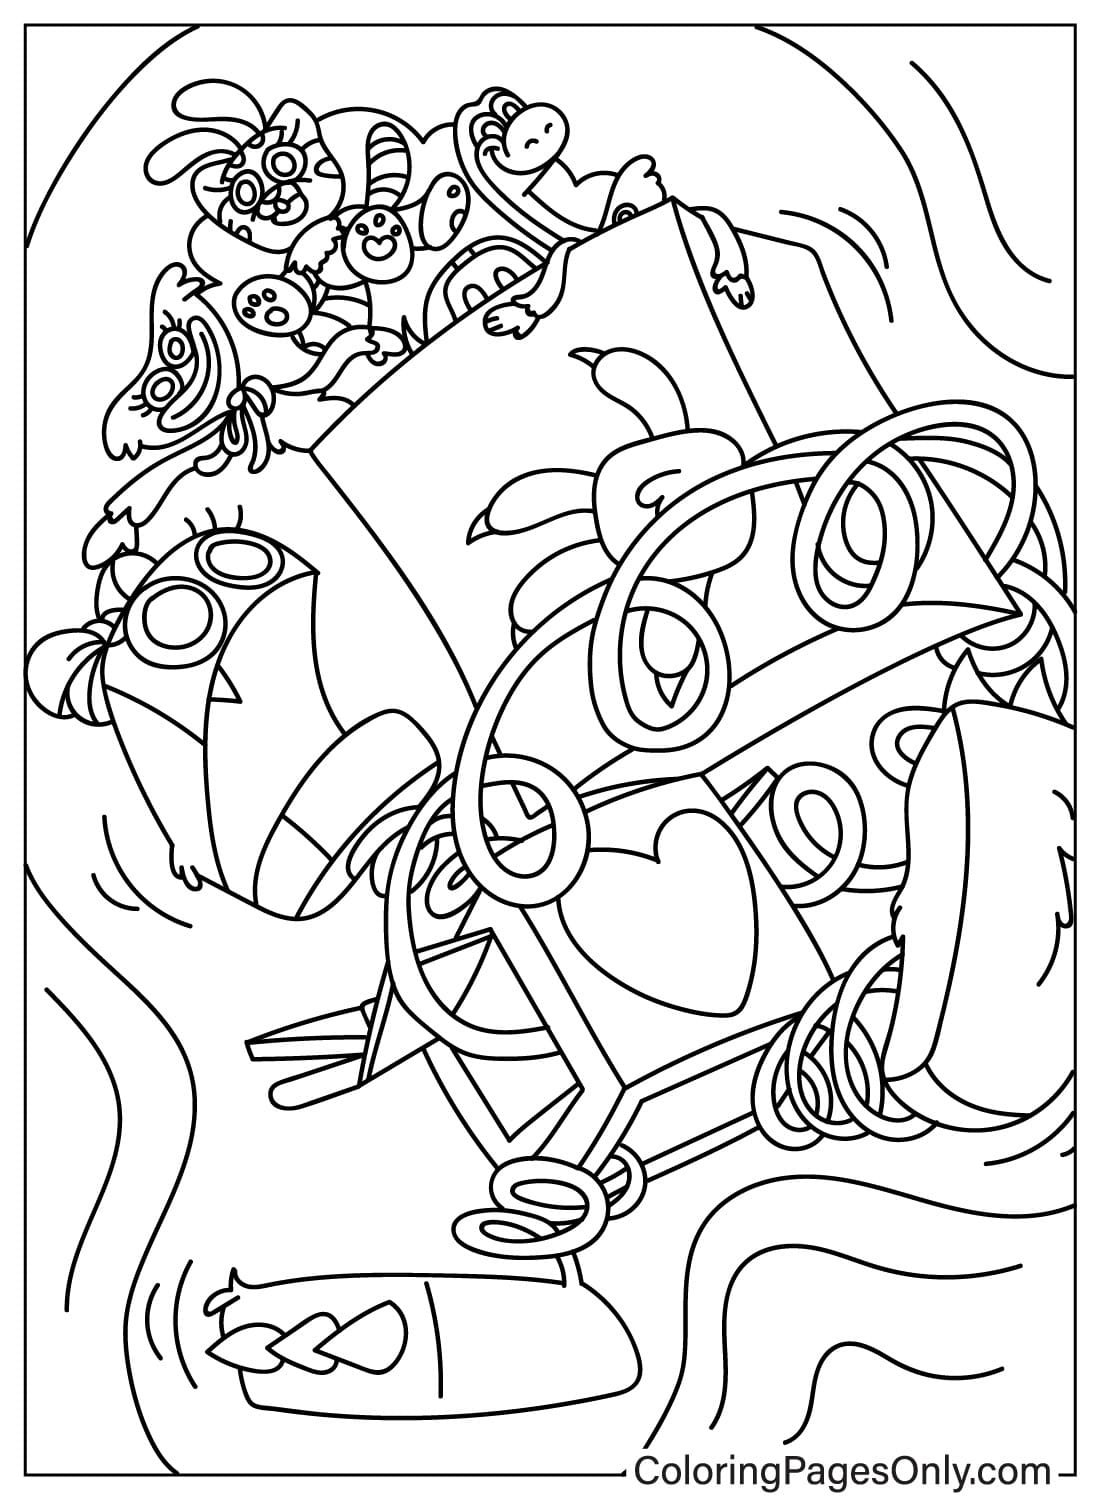 Poppy Playtime Printable Coloring Page from Poppy Playtime